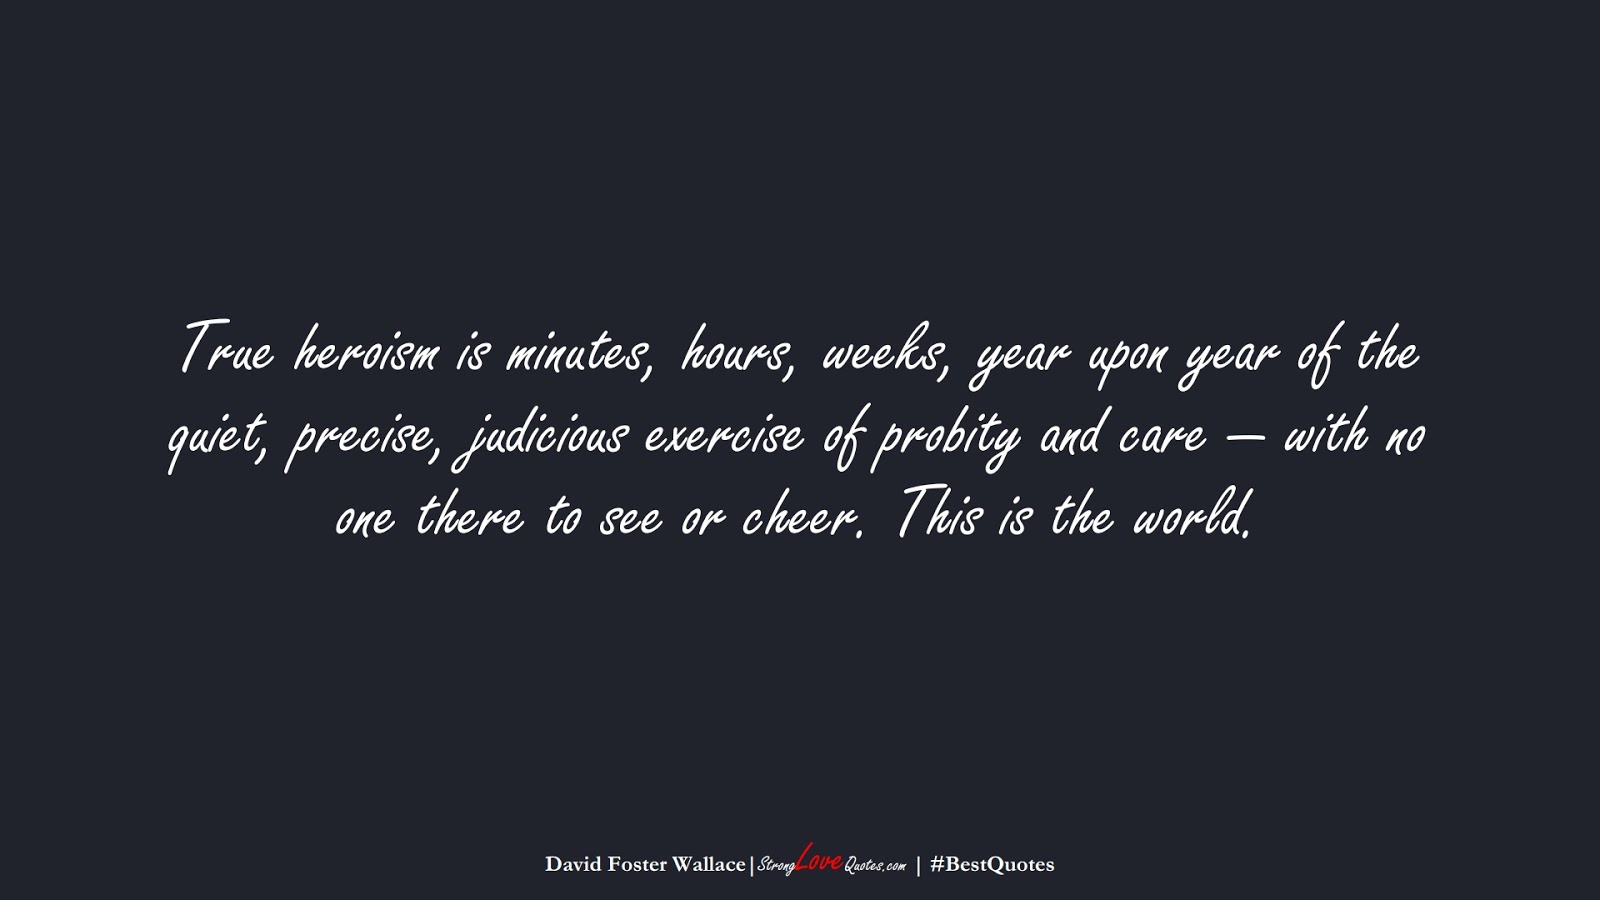 True heroism is minutes, hours, weeks, year upon year of the quiet, precise, judicious exercise of probity and care — with no one there to see or cheer. This is the world. (David Foster Wallace);  #BestQuotes